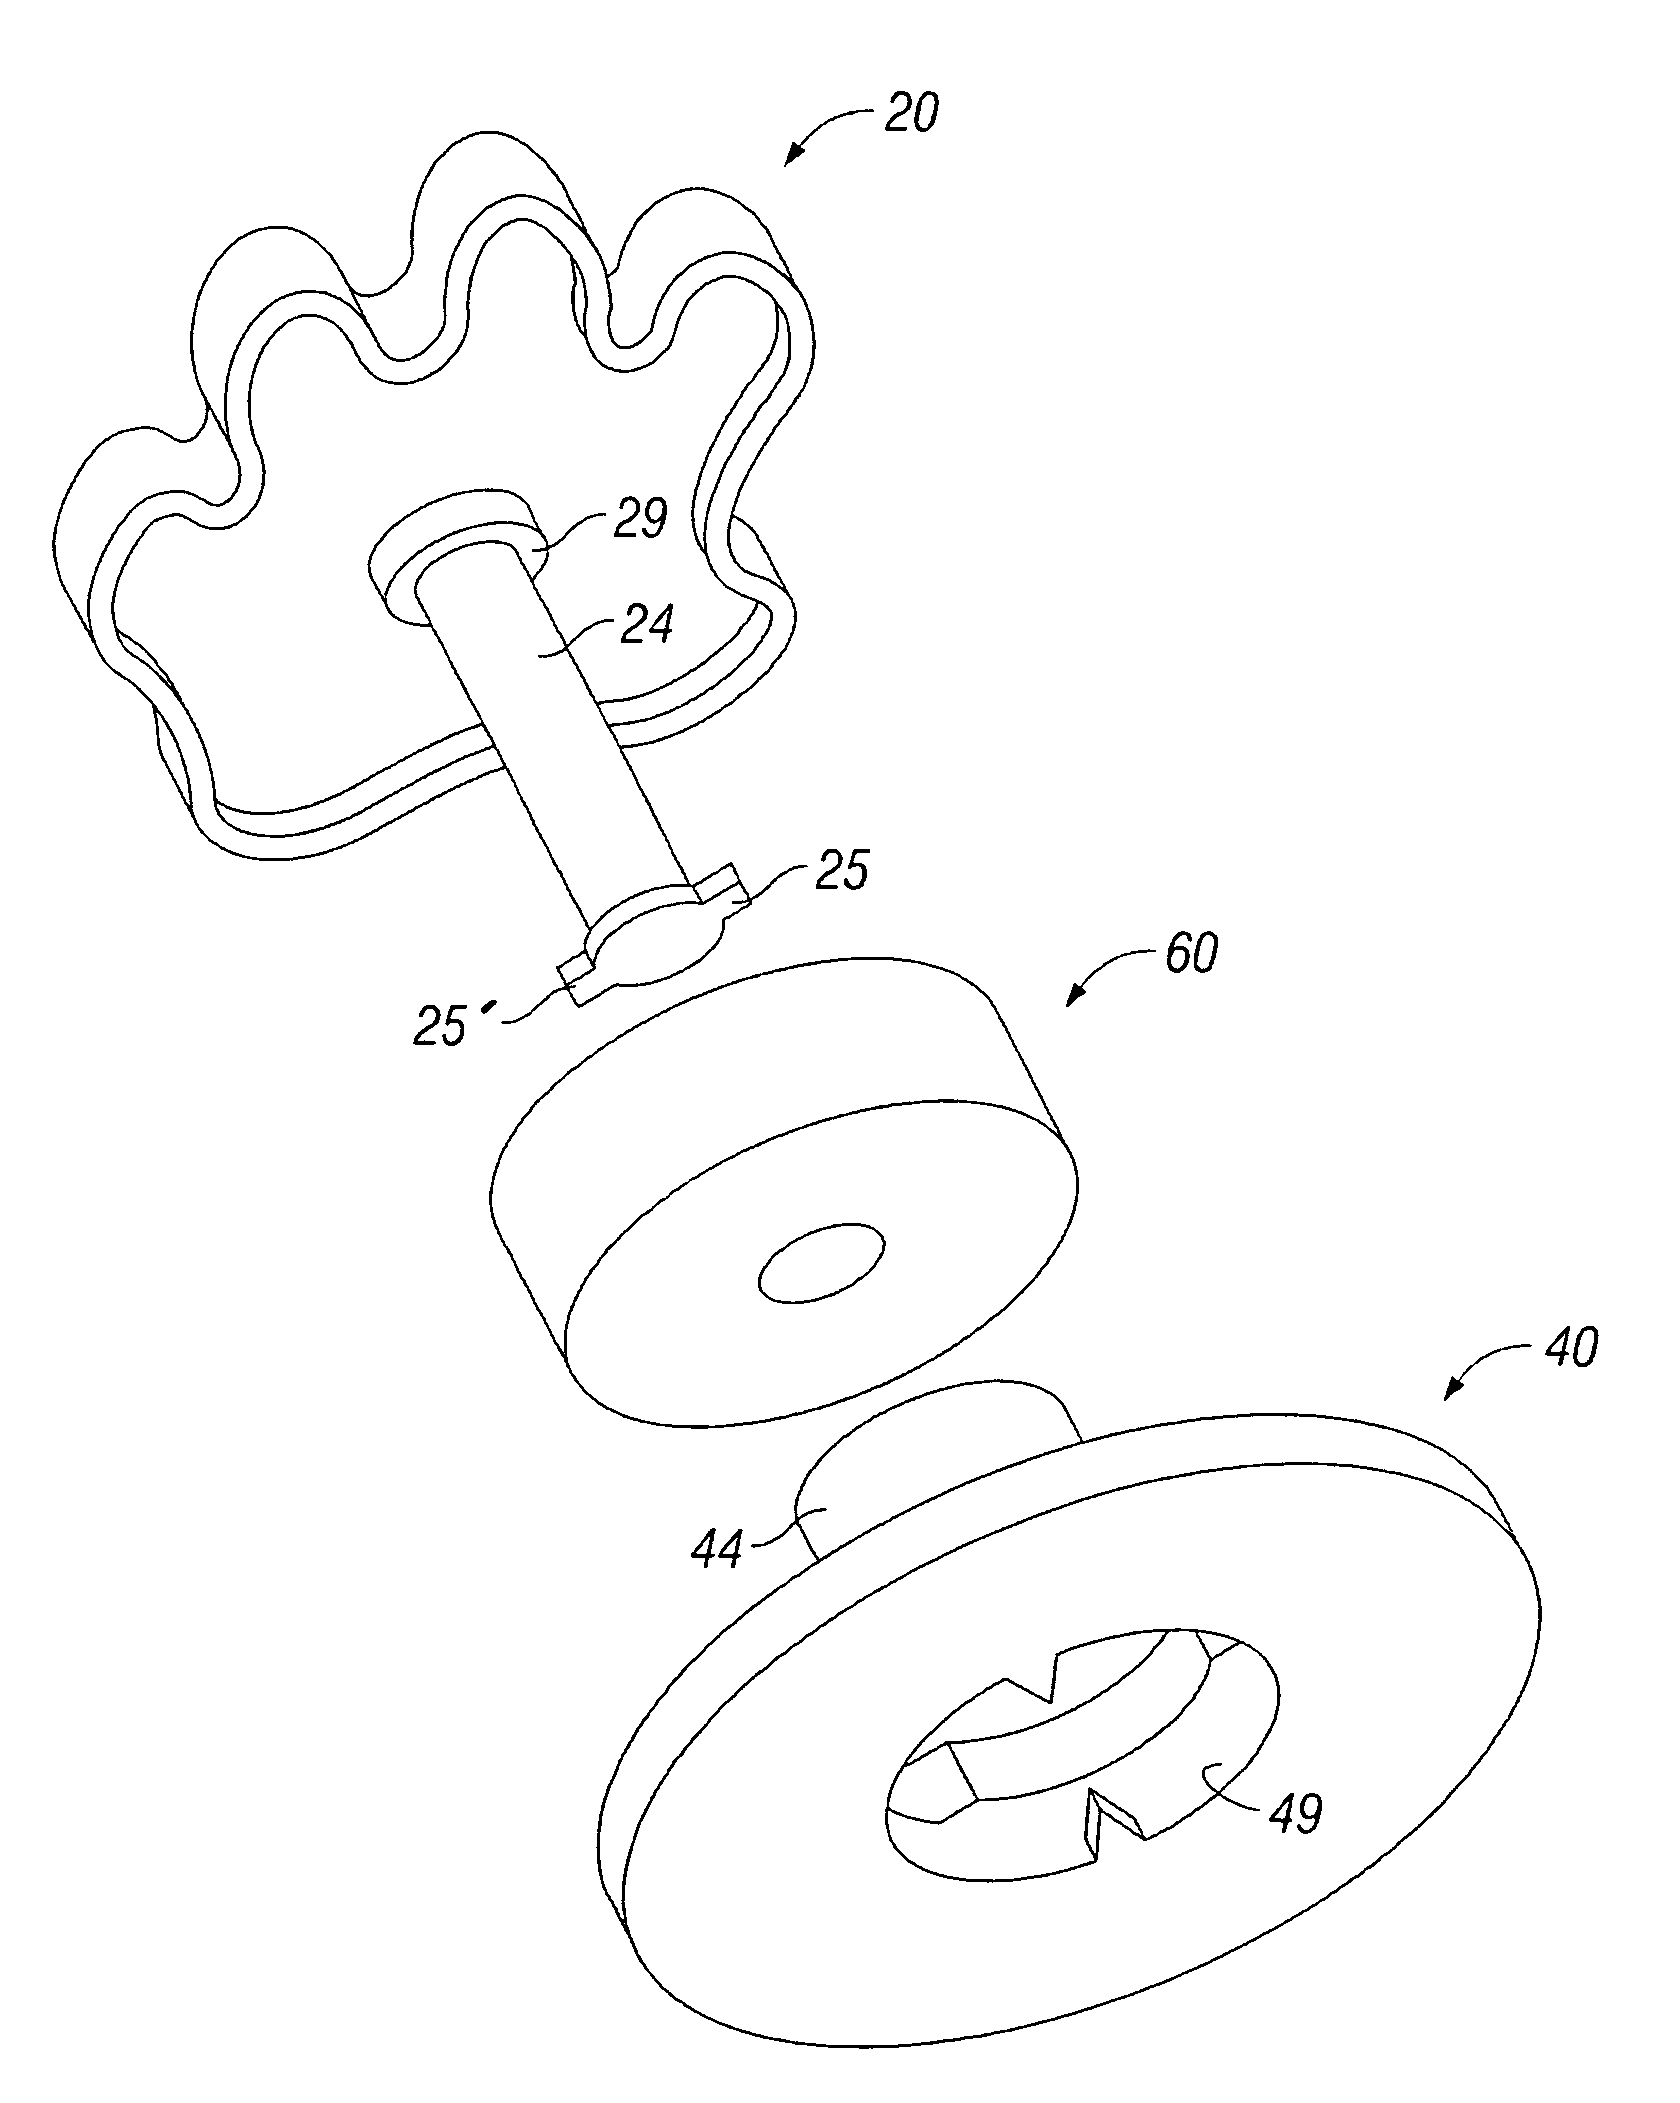 Apparatus and method for securely yet removably attaching ornaments to shoes, clothing, pet collars and the like